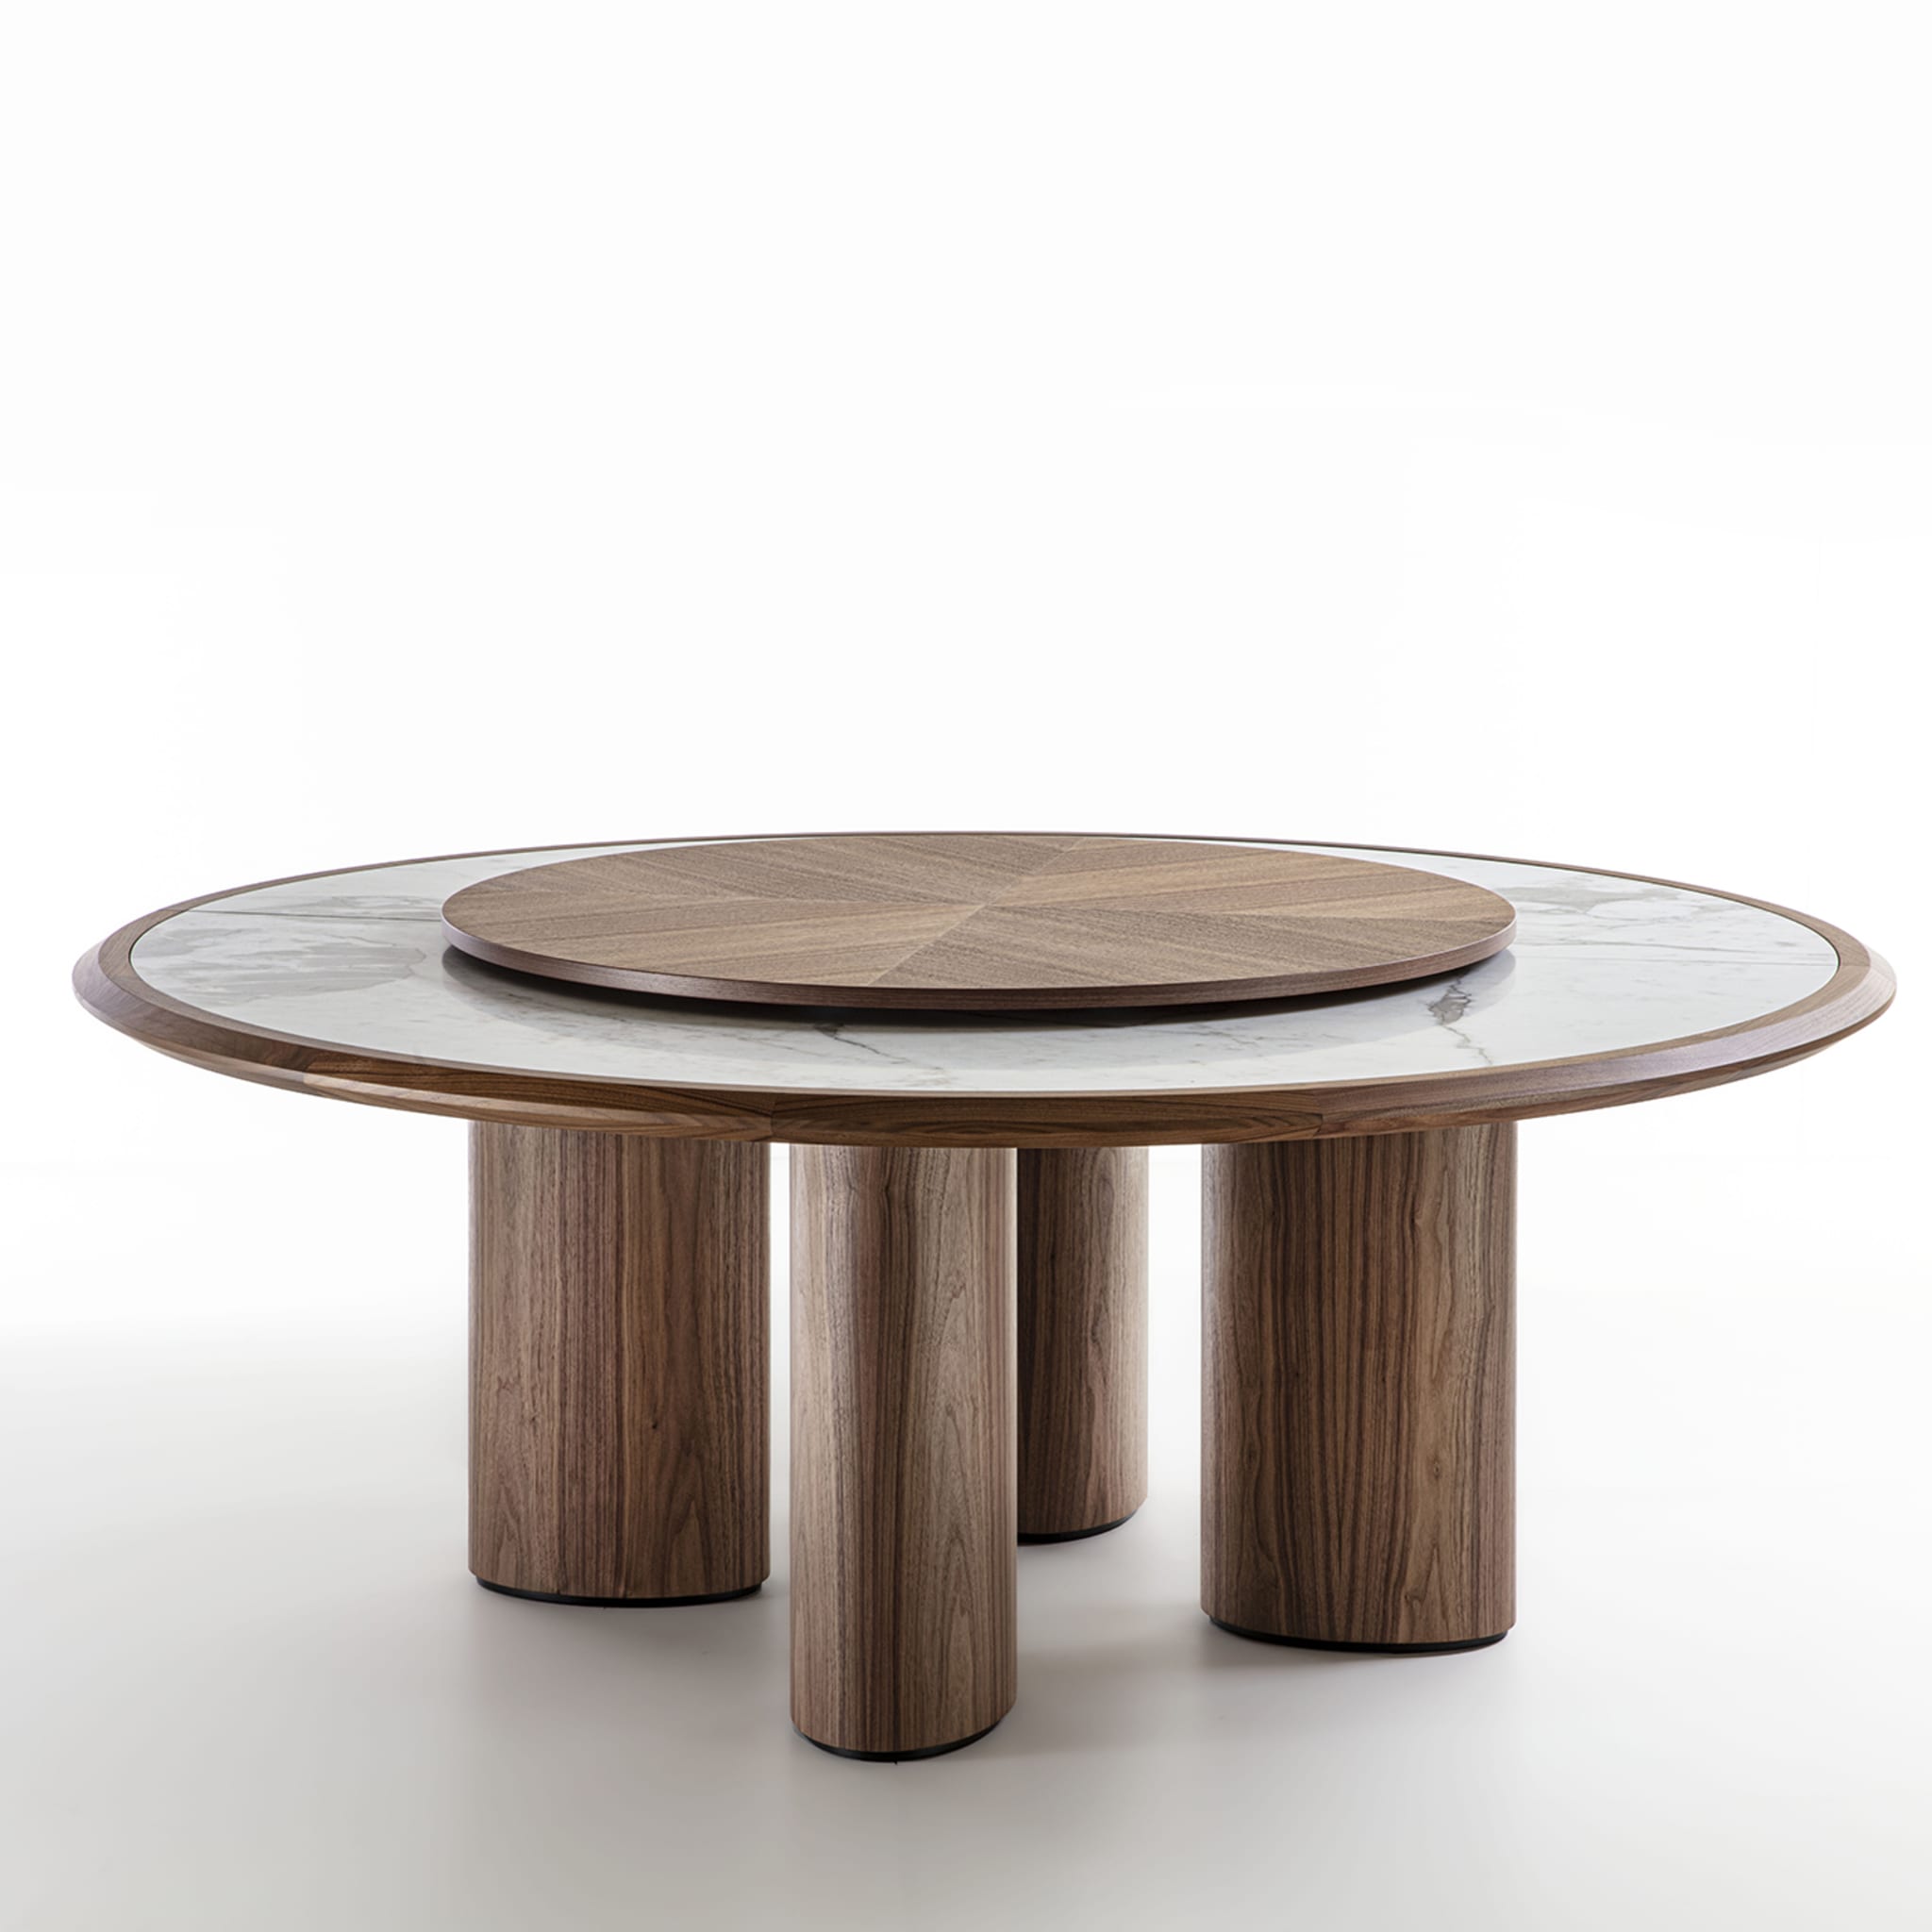 Diamante Round Canaletto & Carrara Marble Table with Lazy Susan - Alternative view 2